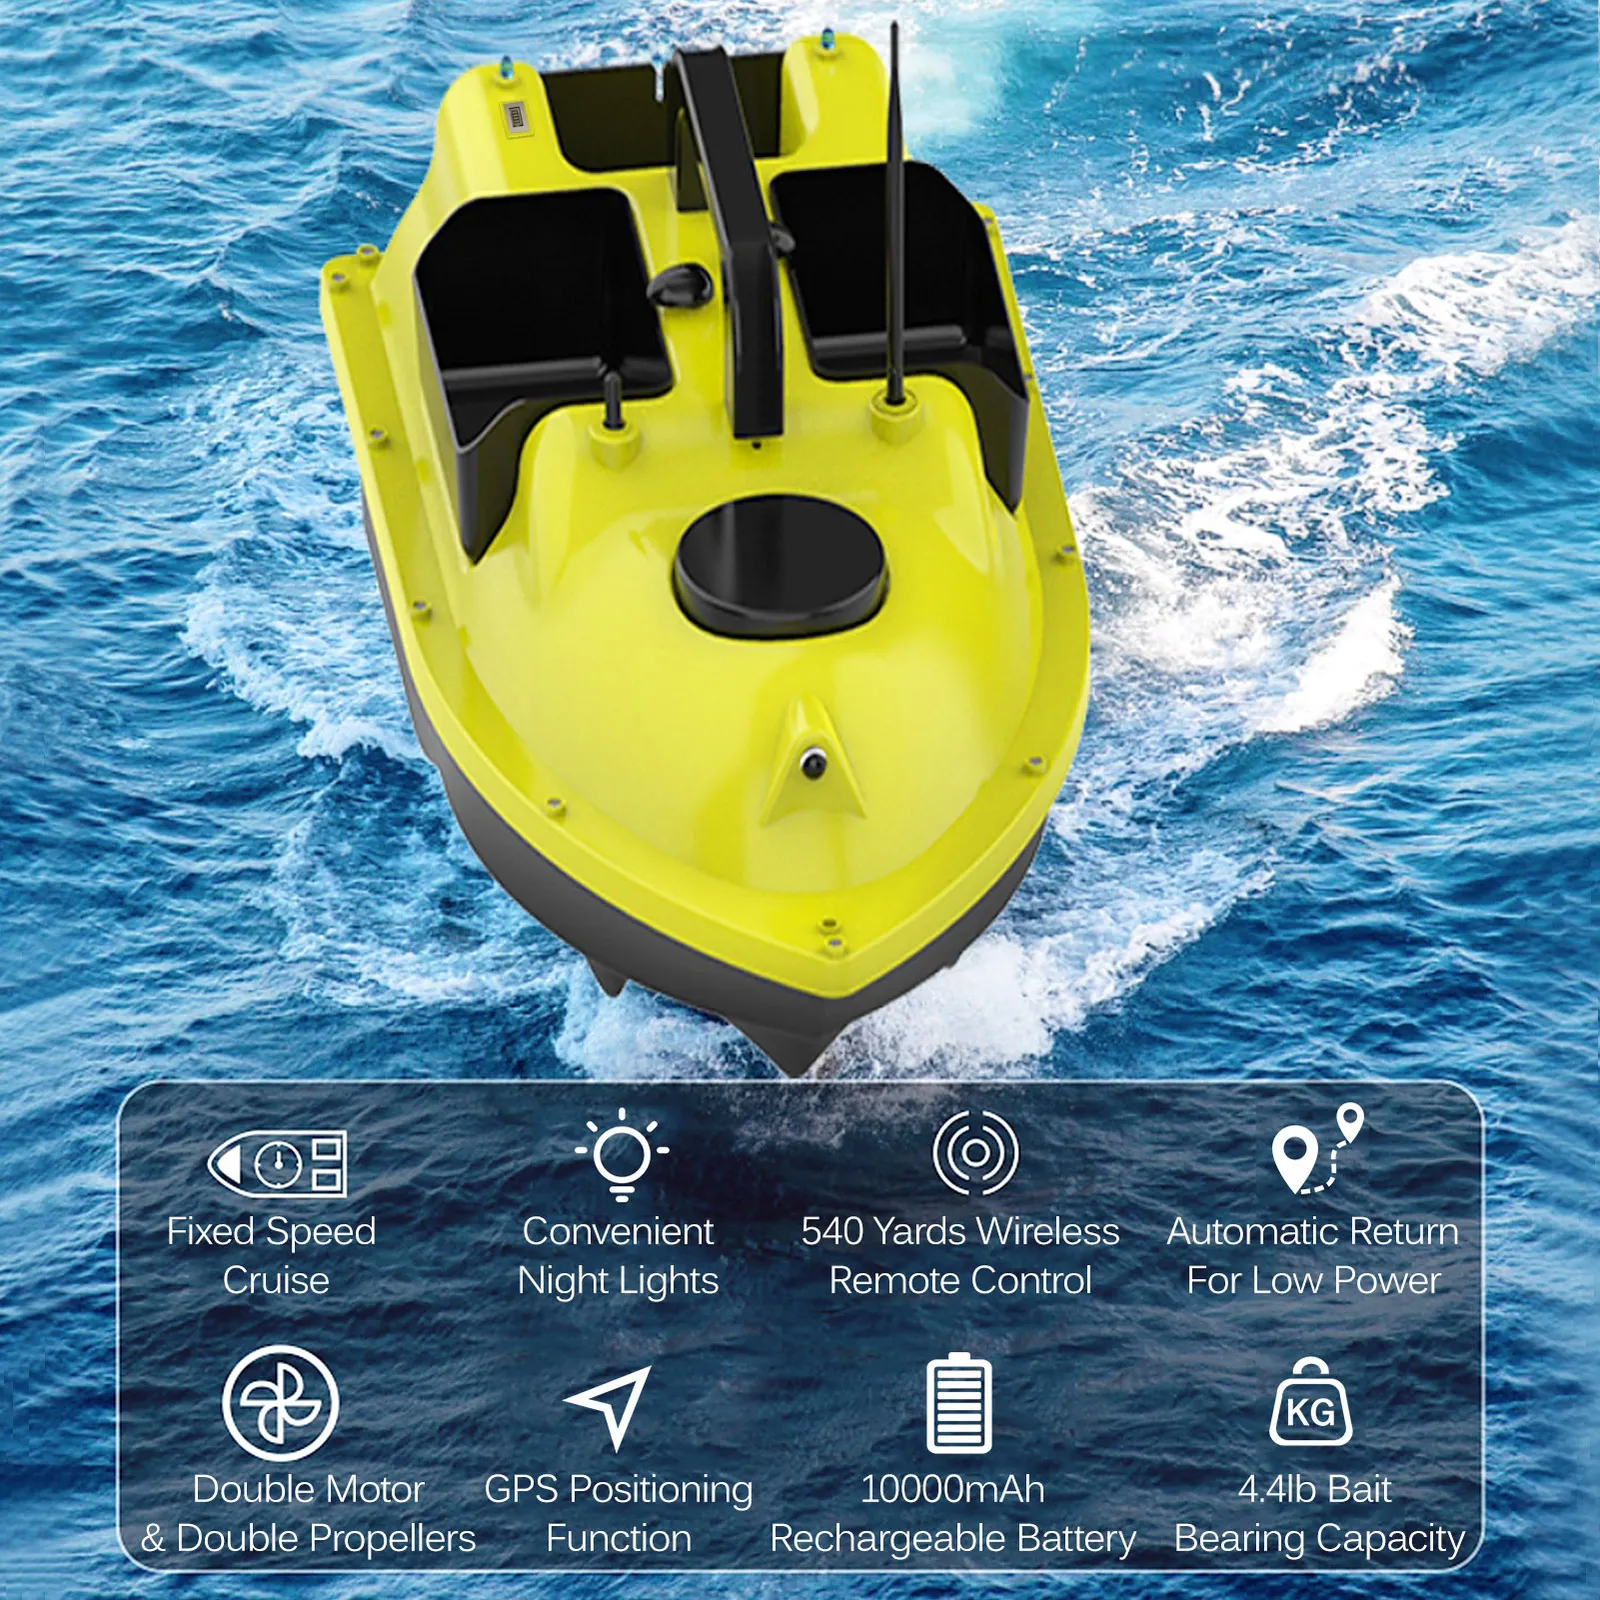 Wireless GPS Fishing Rt4 Bait Boat With 400 500M Range Perfect For Couples  From Xuan08, $109.27